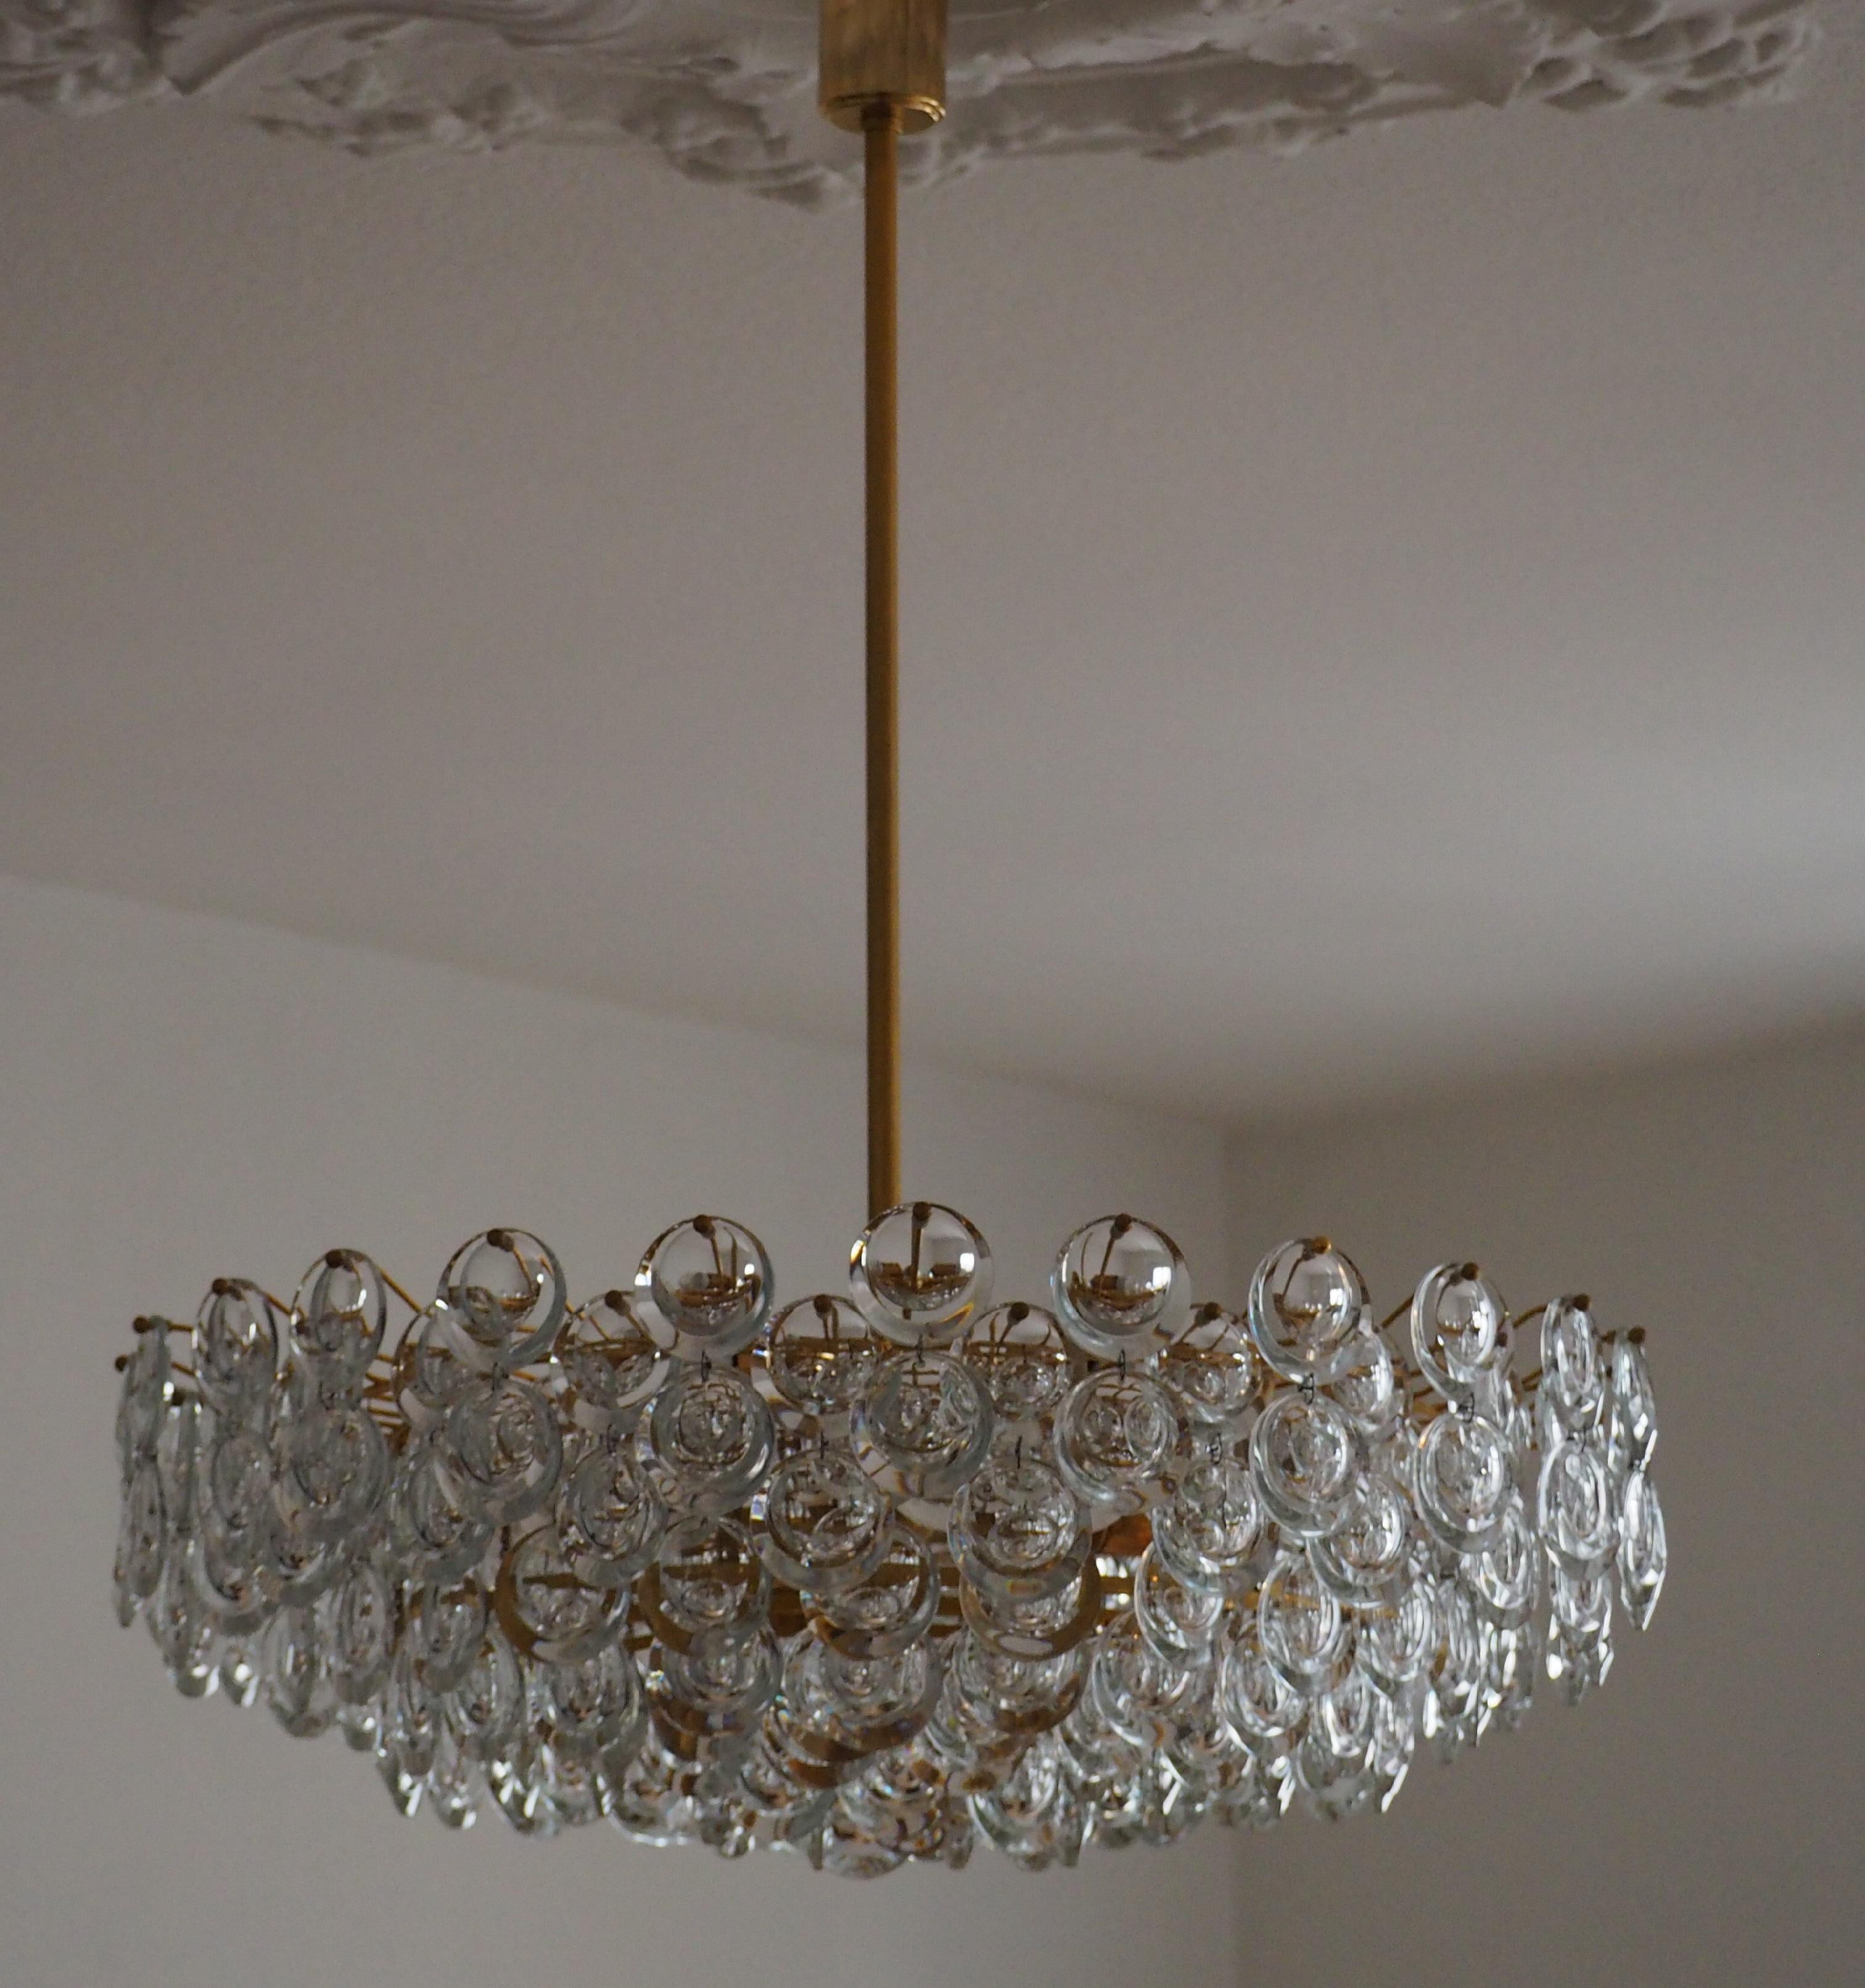 German Pair of Huge Gold-Plated and Cut Glass Chandeliers by Palwa, circa 1960s